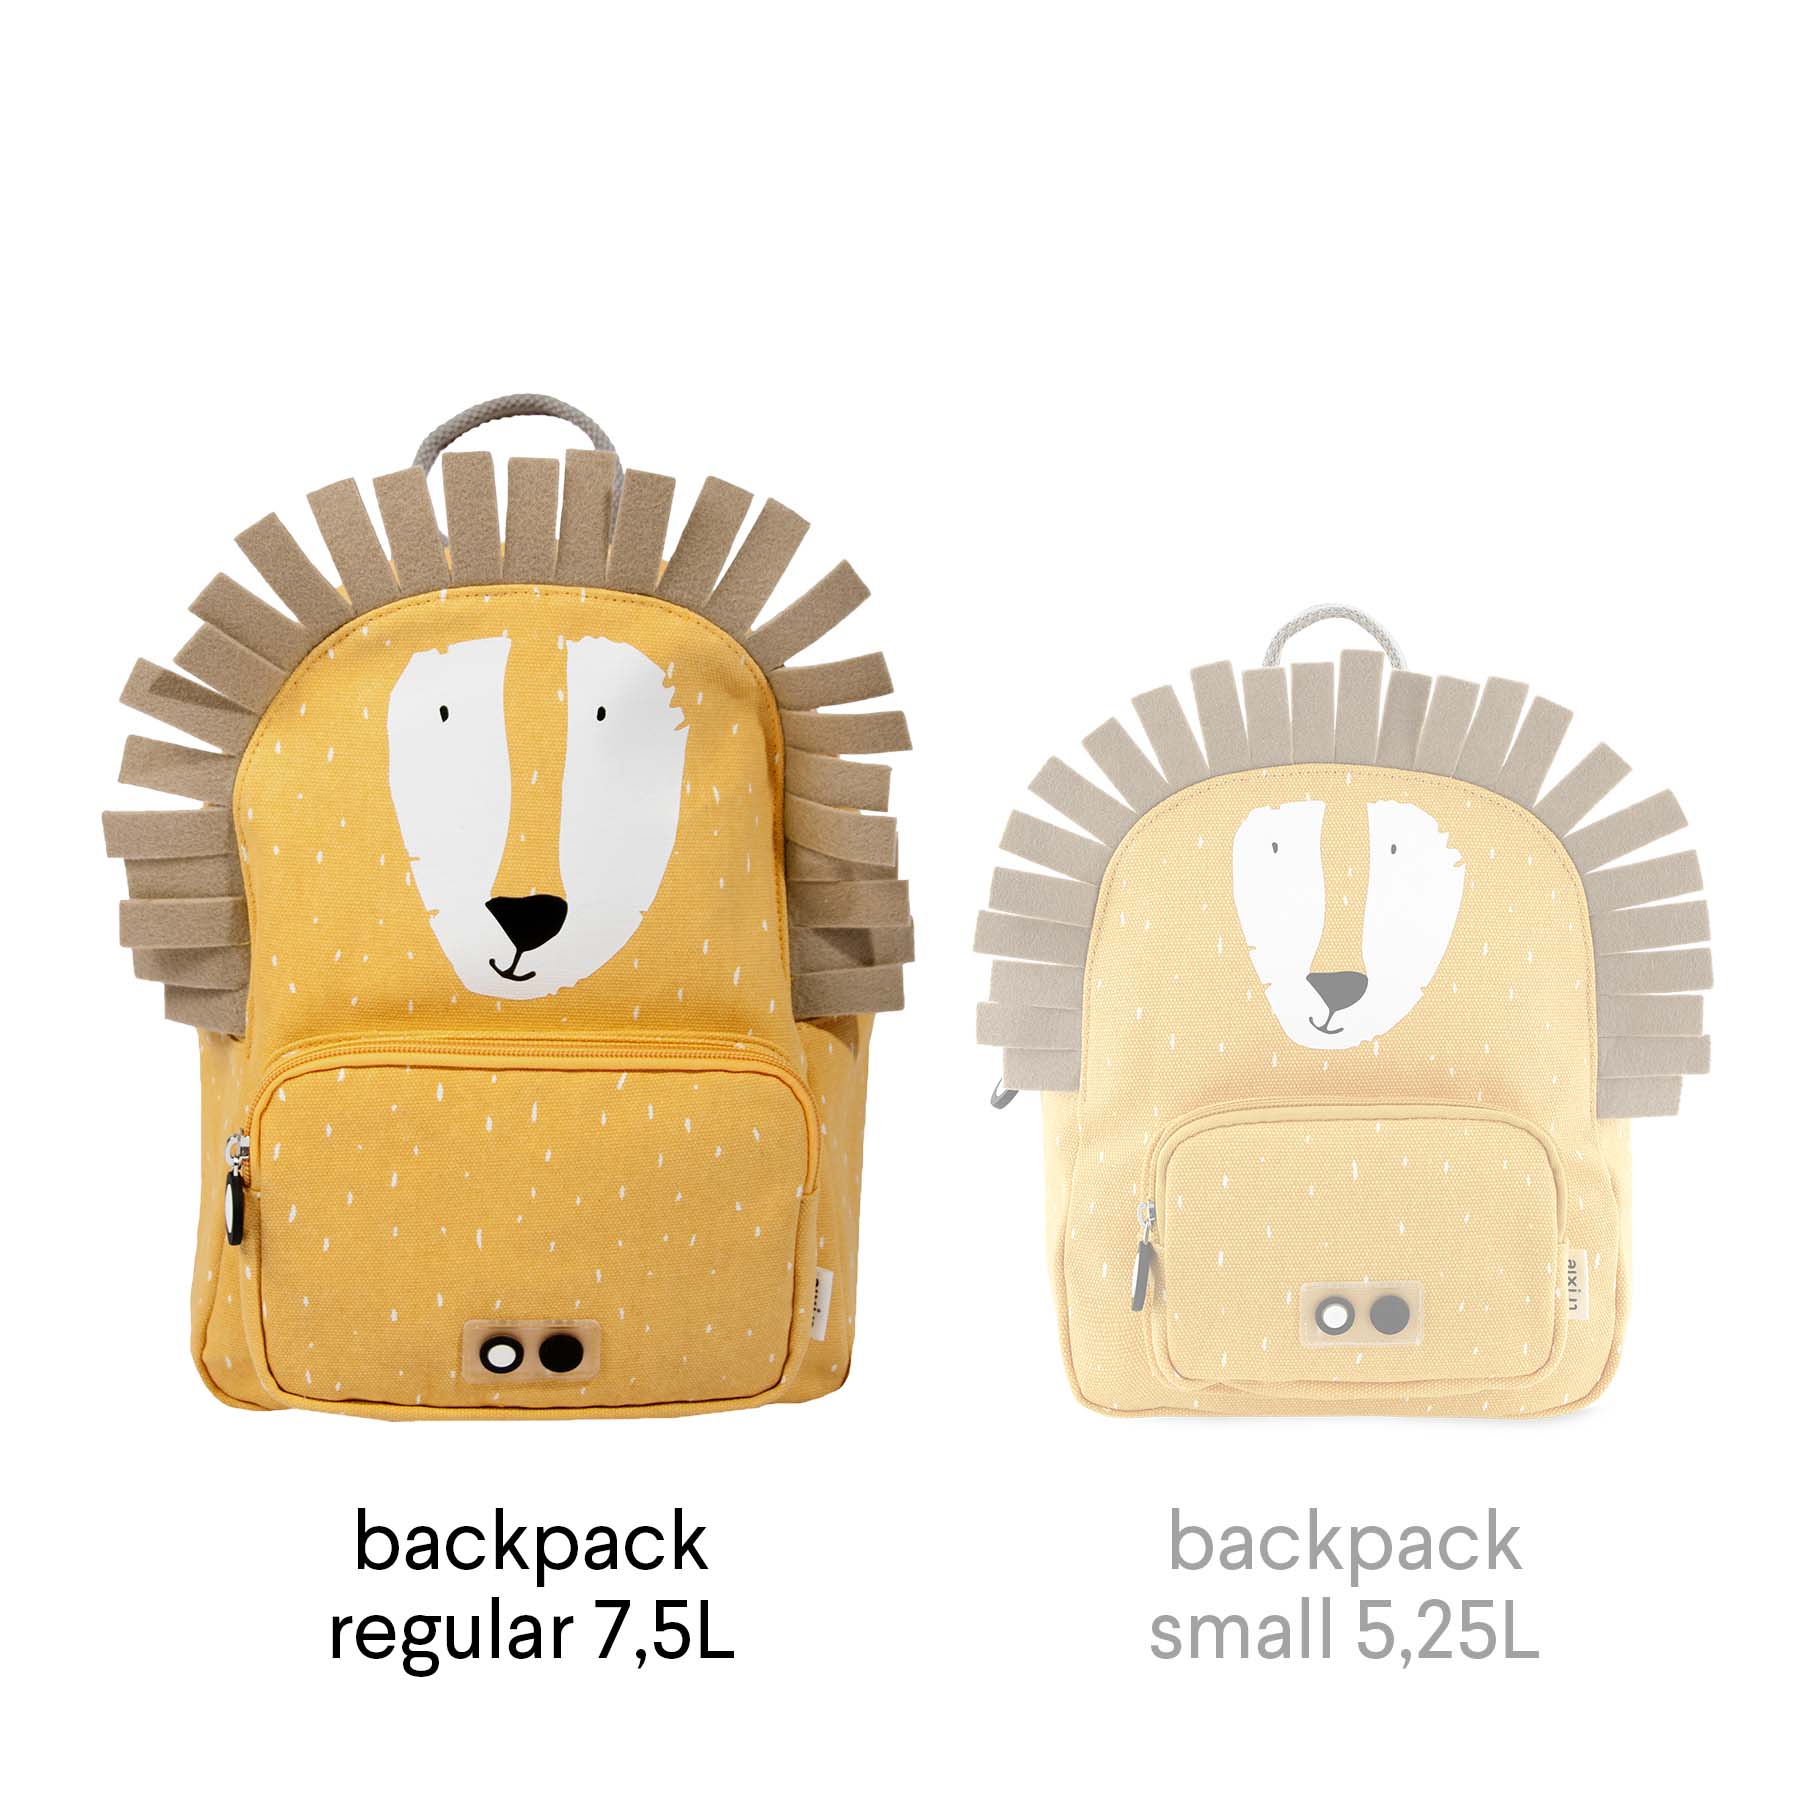 A yellow backpack featuring a lion face design, ideal for kids' adventures. Adjustable padded straps, chest strap, water-repellent cotton material, and practical compartments. Product title: Backpack - Mr Lion.